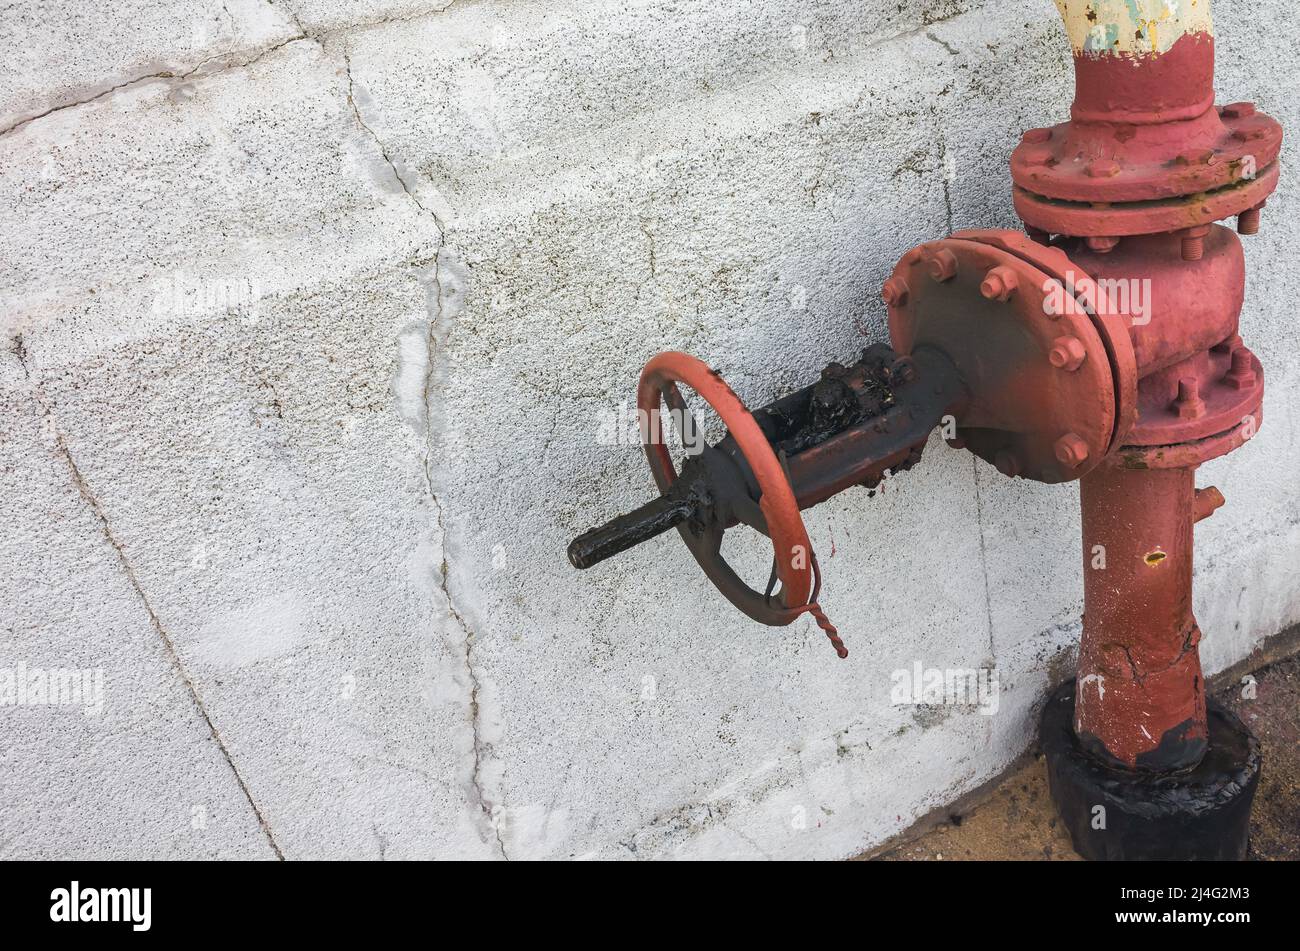 Blocked red gas valve mounted near gray concrete wall, close up photo Stock Photo